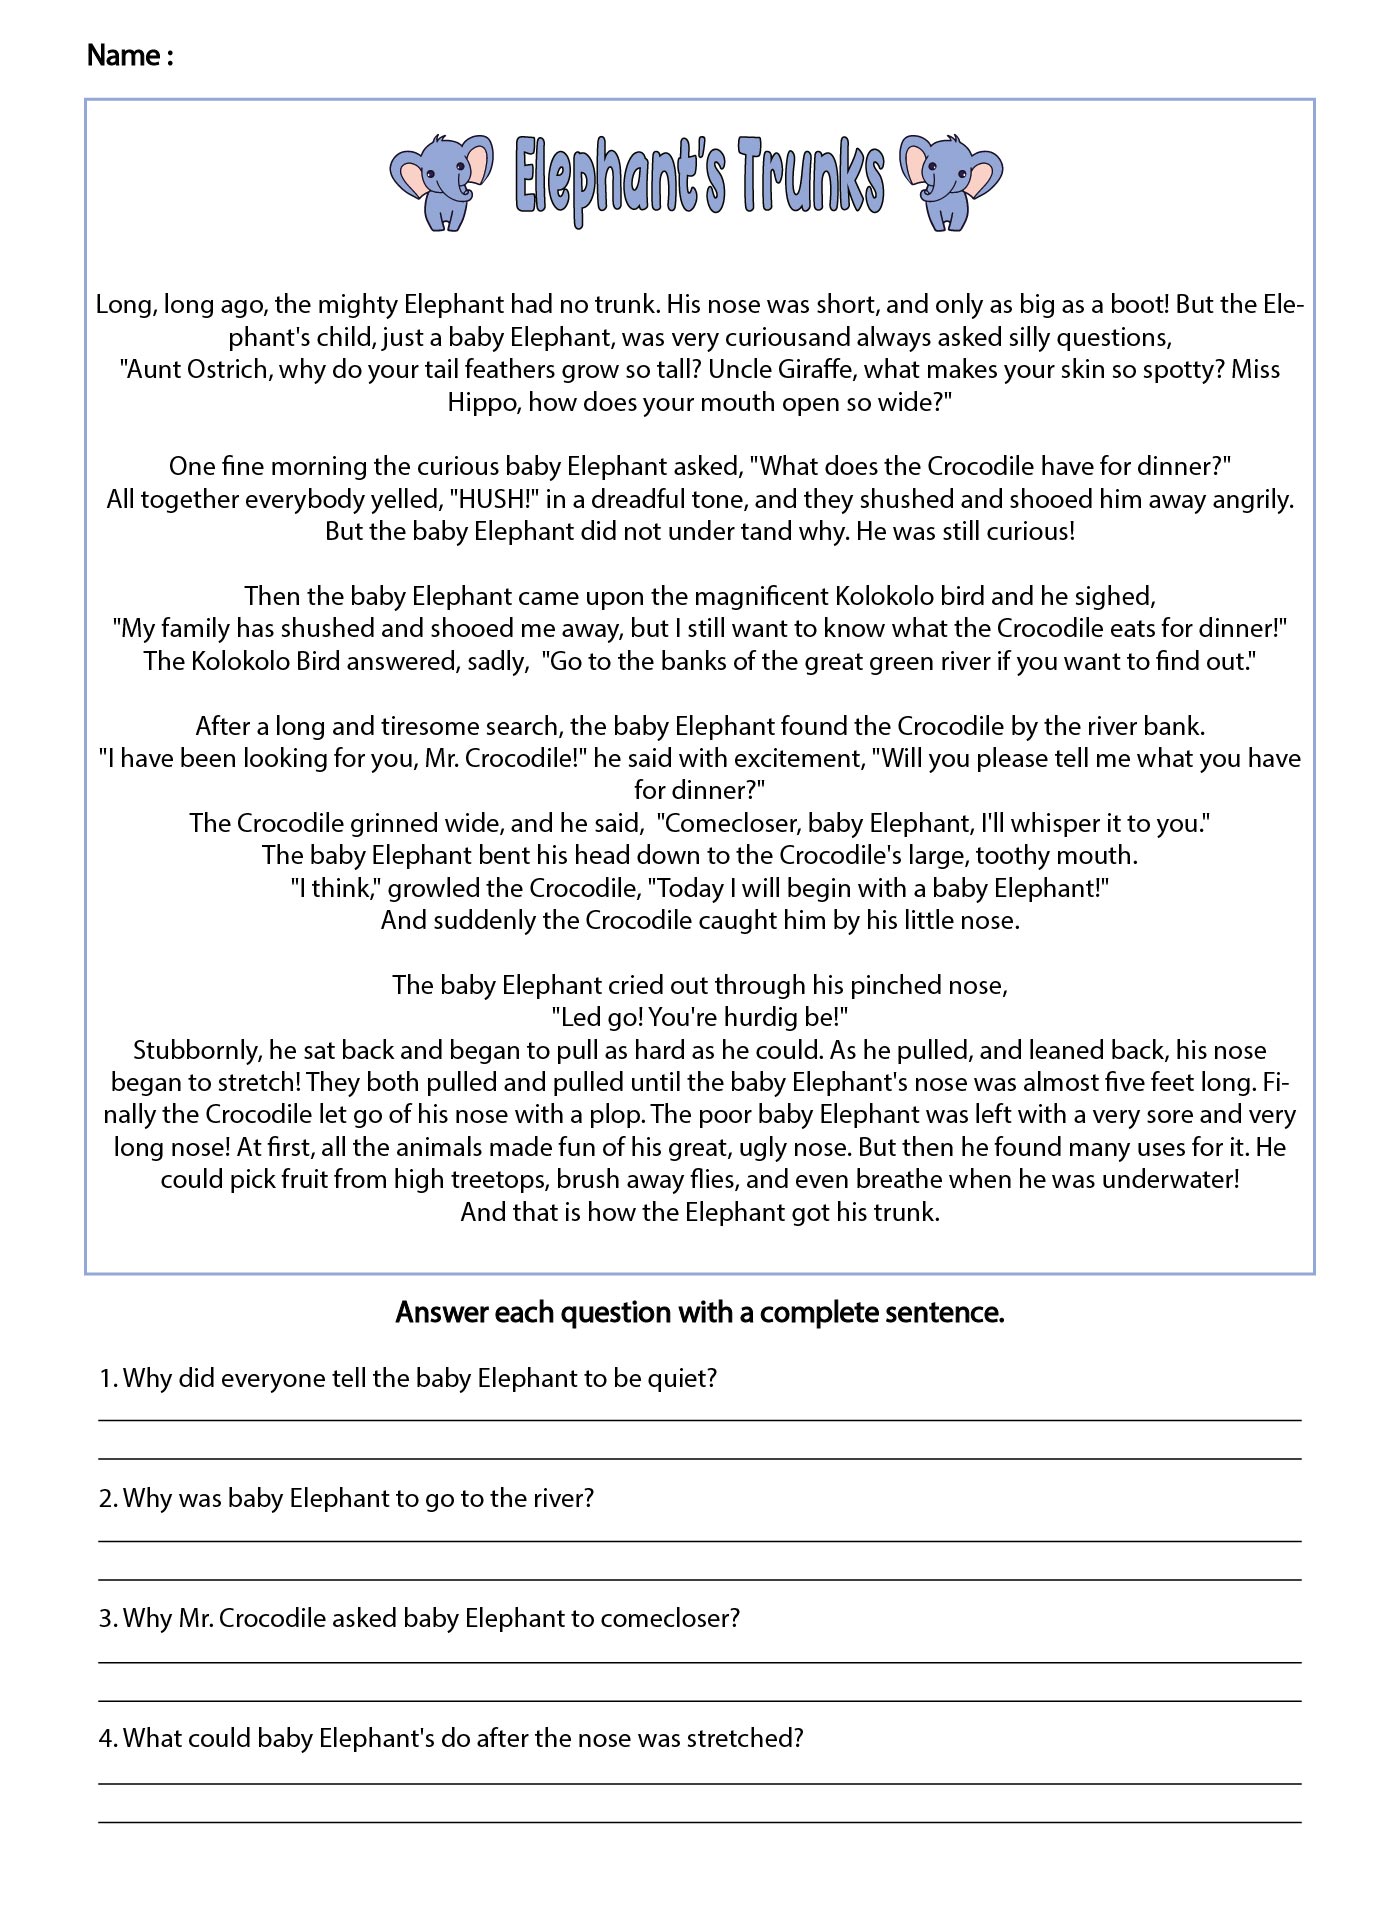 Printable 4th Grade Reading Comprehension Passages And Questions